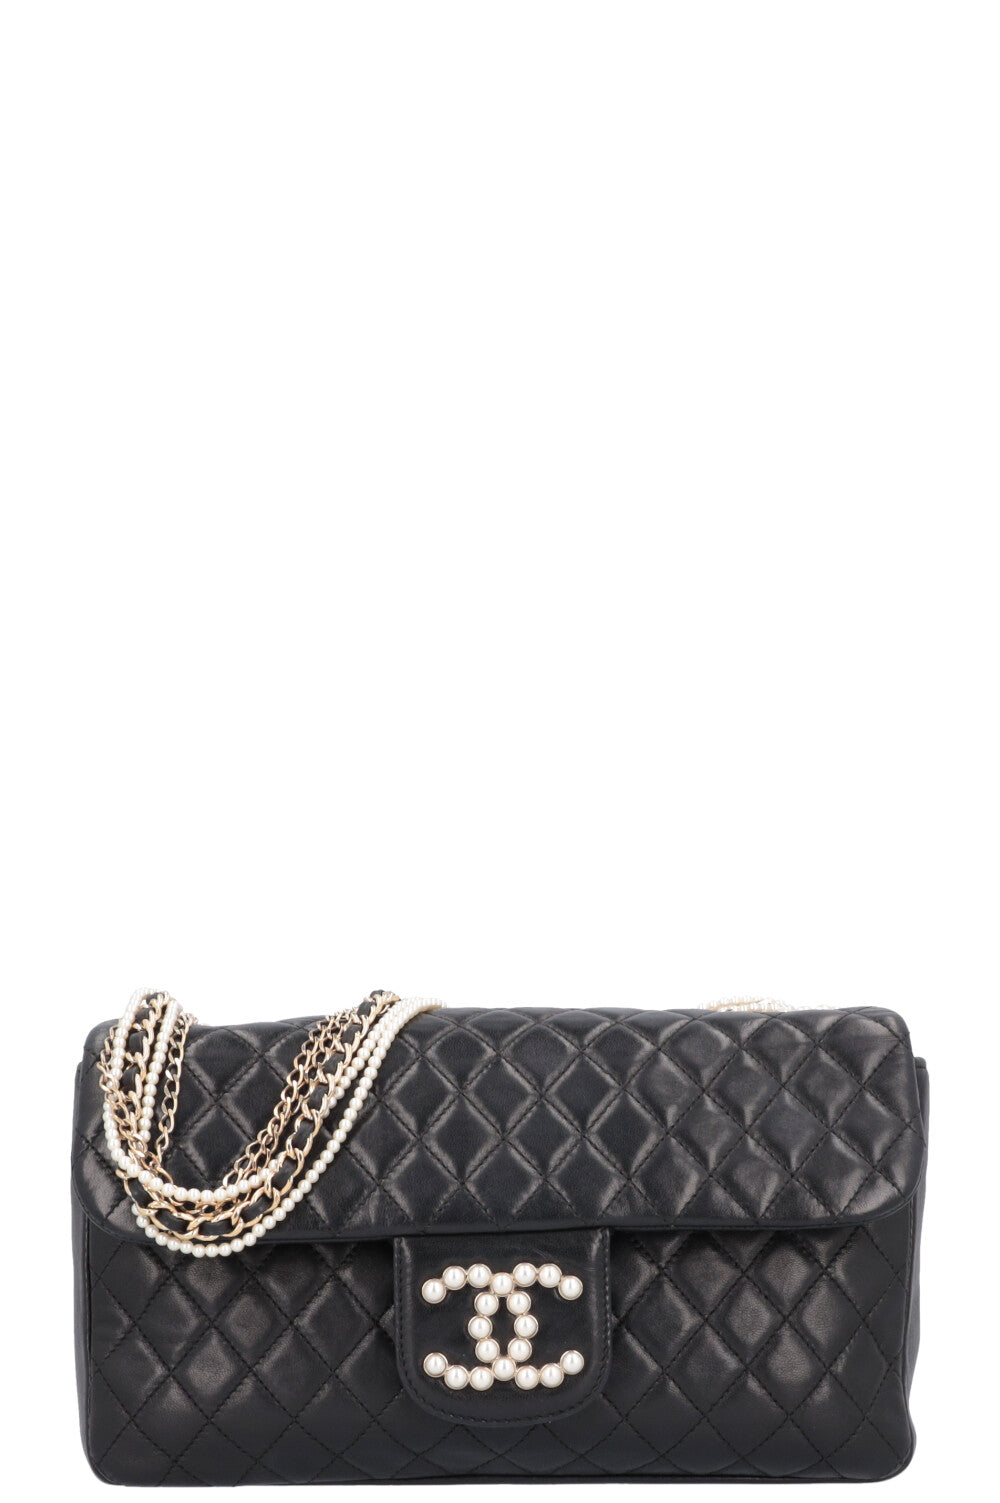 CHANEL Lambskin Quilted Medium Westminster Pearl Flap bag